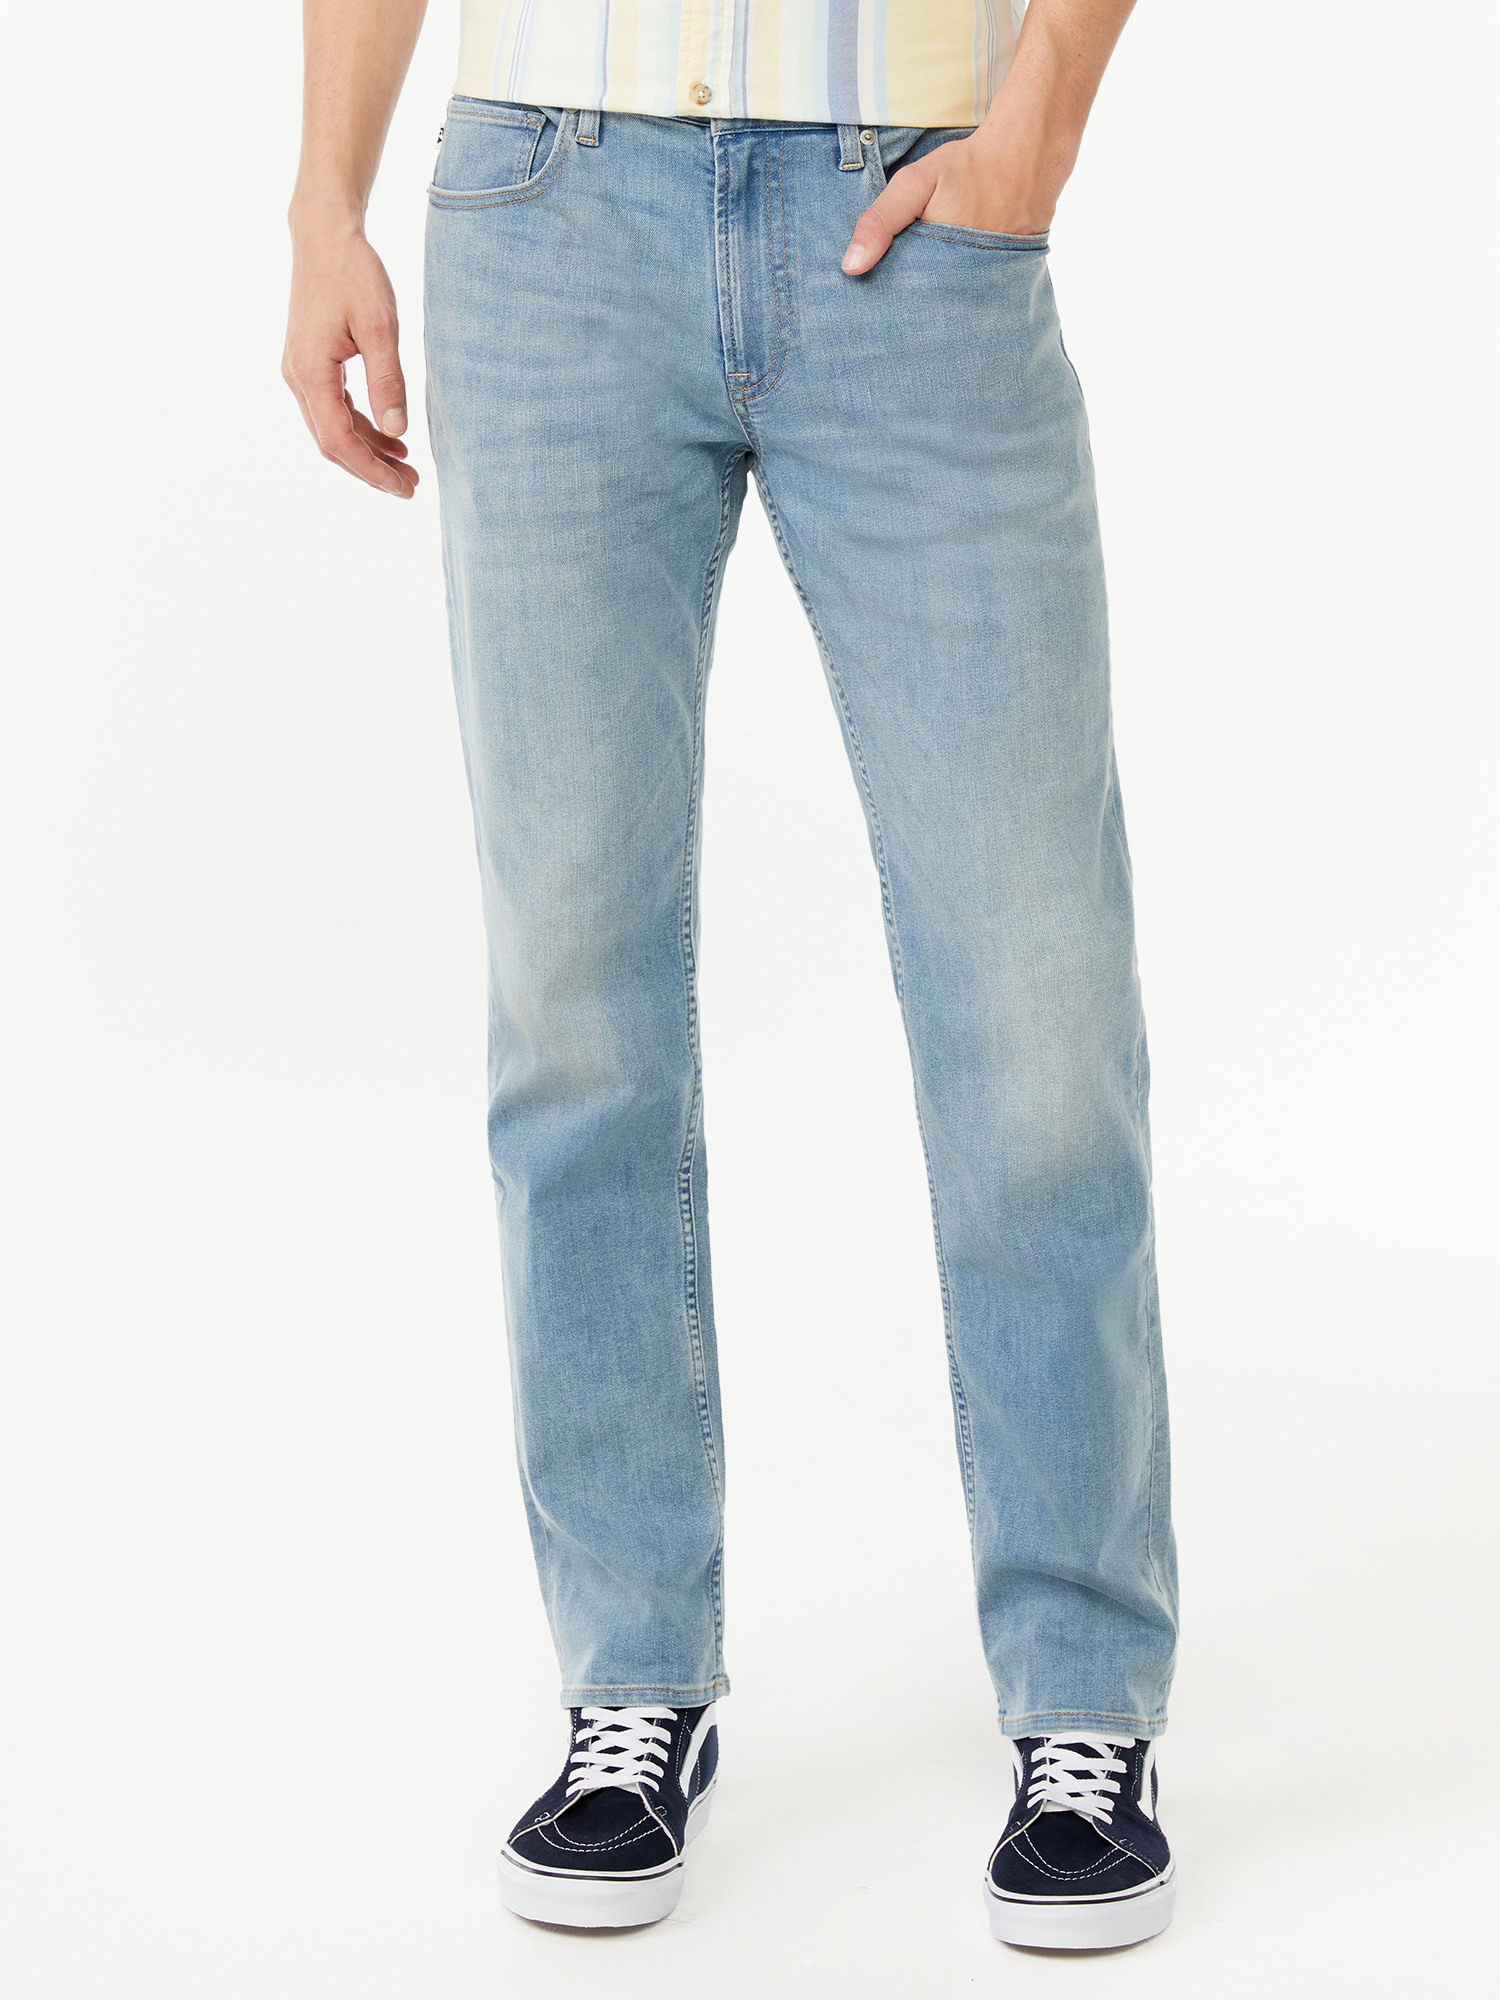 Free Assembly Men's Mid Rise Slim Jeans - image 1 of 6